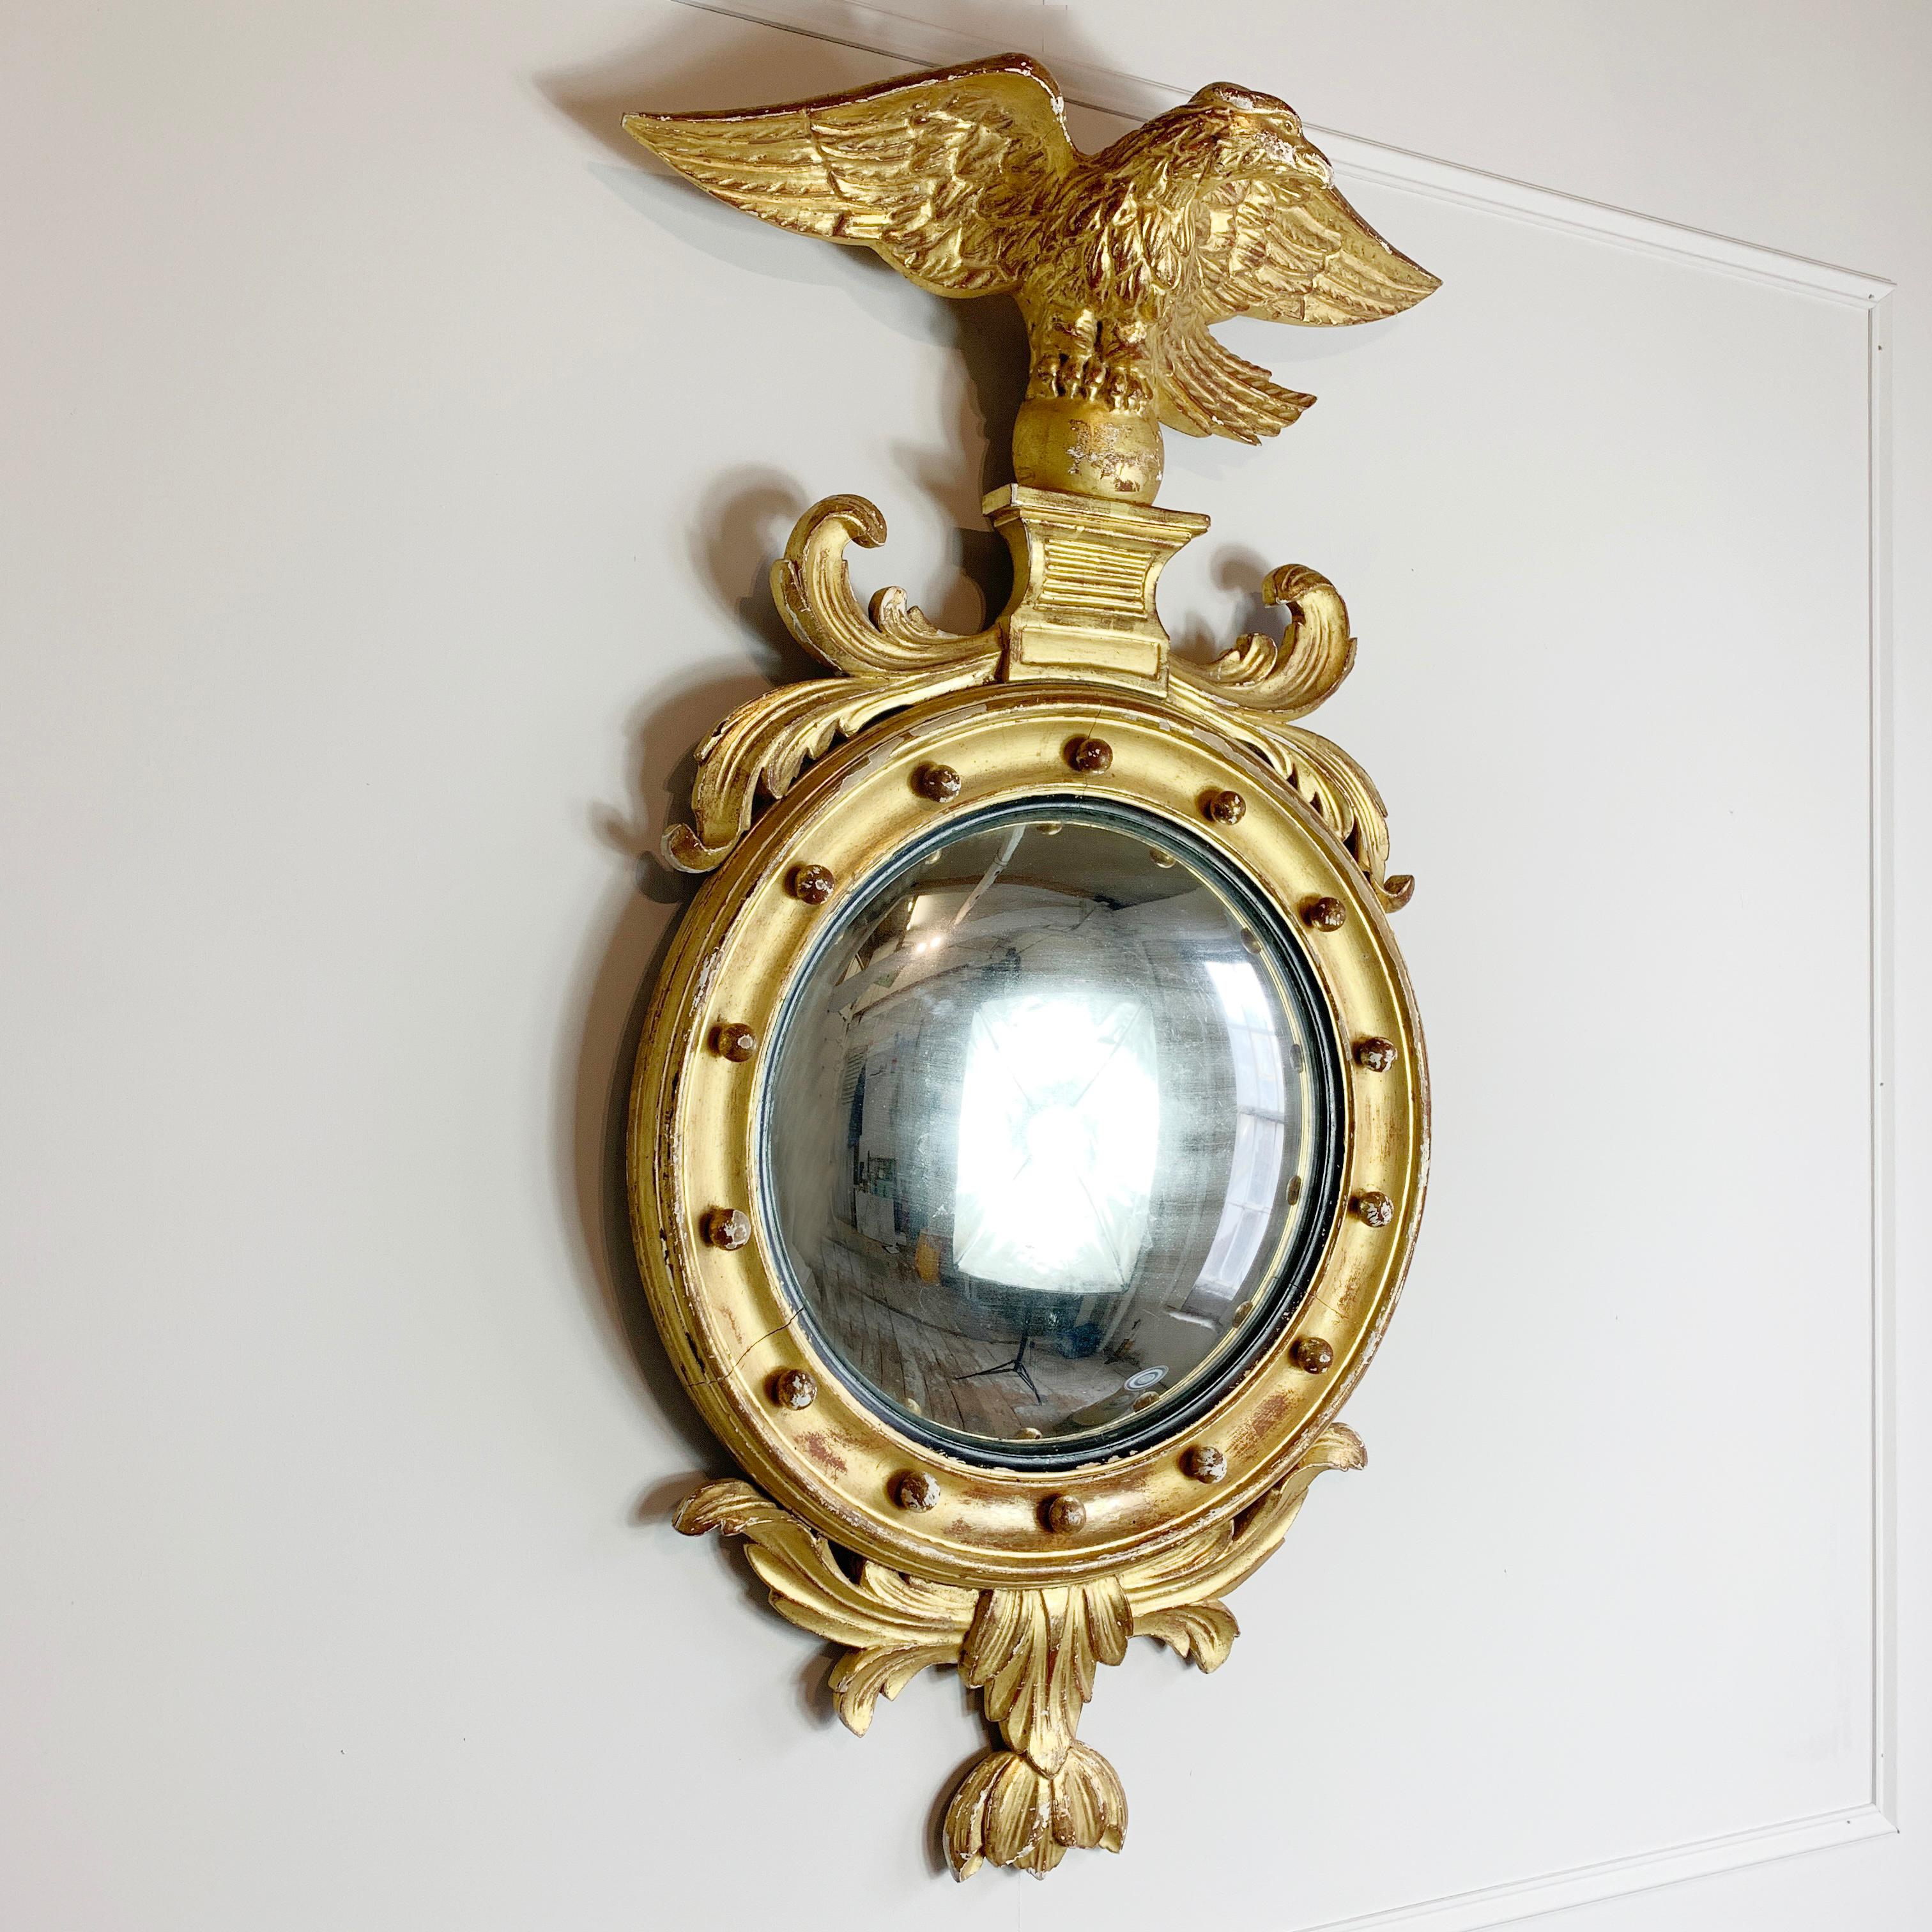 Large proportion gilt convex mirror, in the federal style
Dating to circa 1810, English
Adorned with a large carved wooden eagle to the crest, with profuse foliage and acanthus carvings around the convex glass
Wood with gilded Gesso throughout,